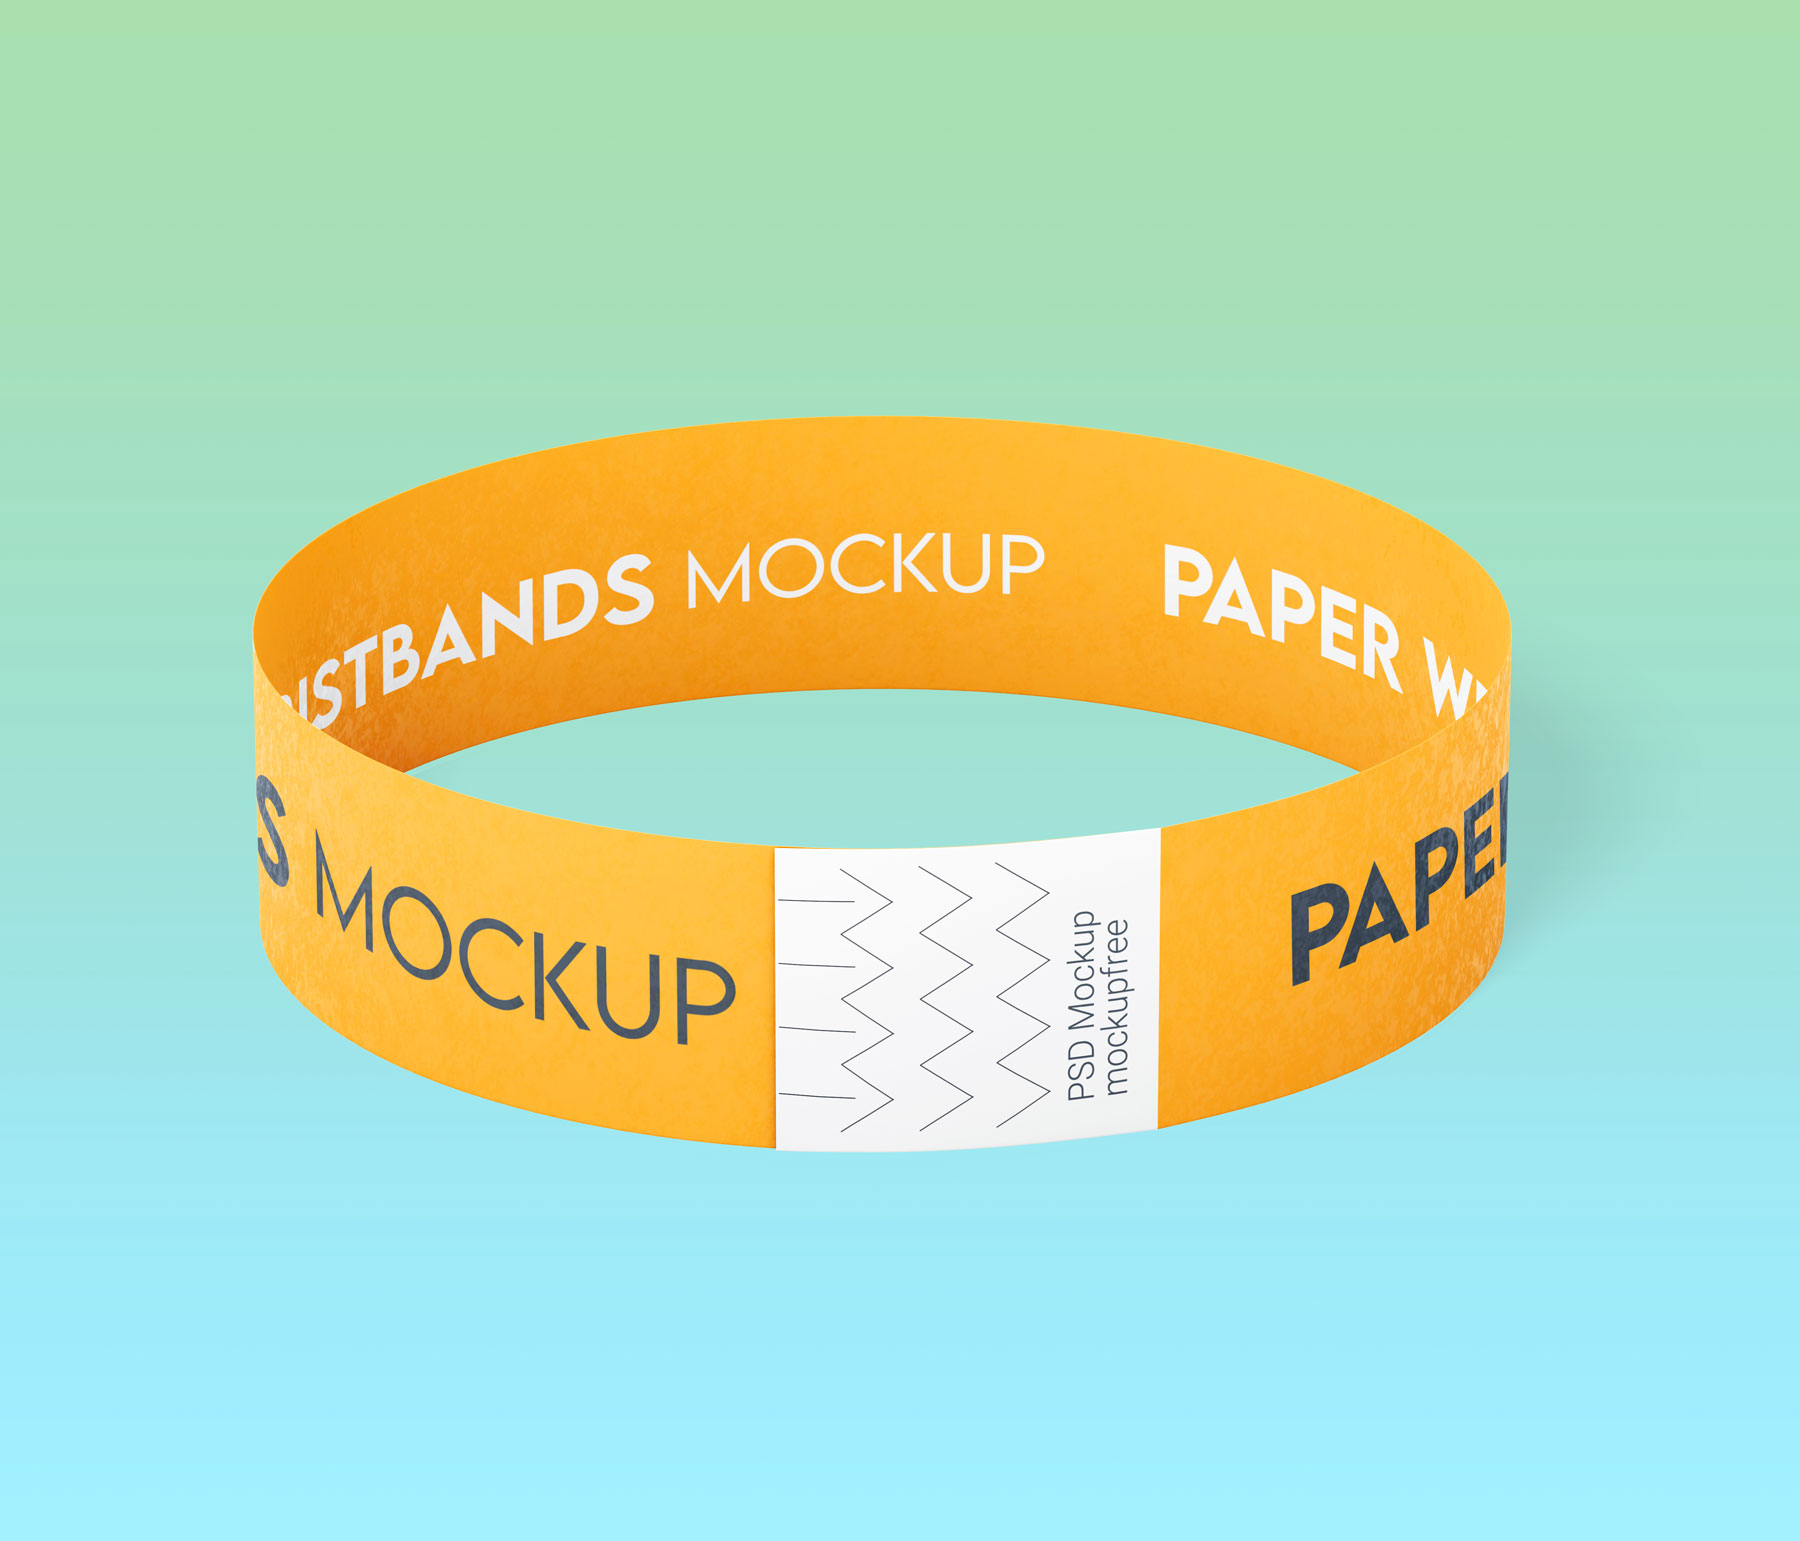 Wristband Mockup - Free Download Images High Quality PNG, JPG - 87142